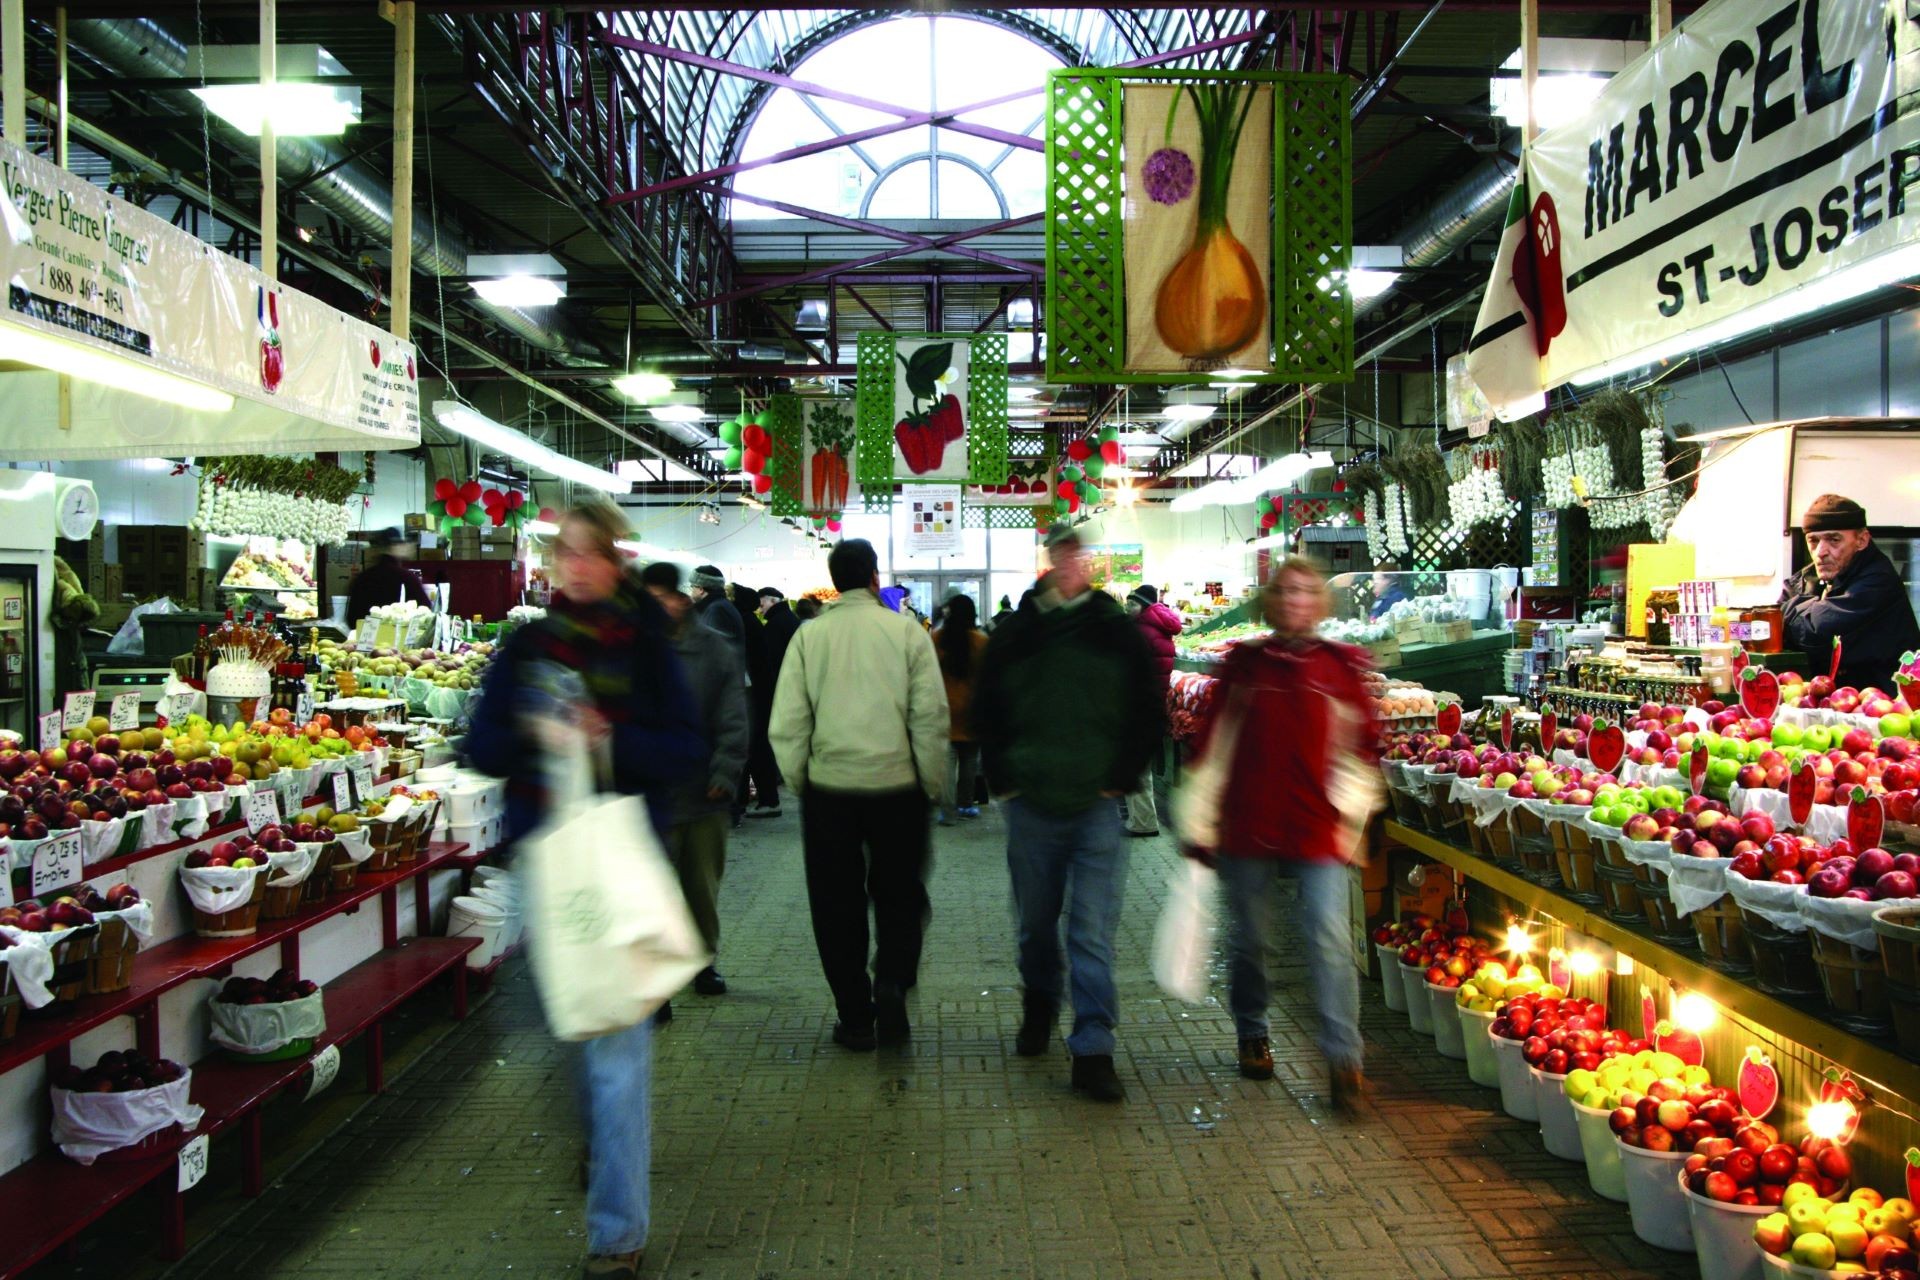 A bustling indoor market scene with vendors and customers around stalls filled with fresh produce and other goods.